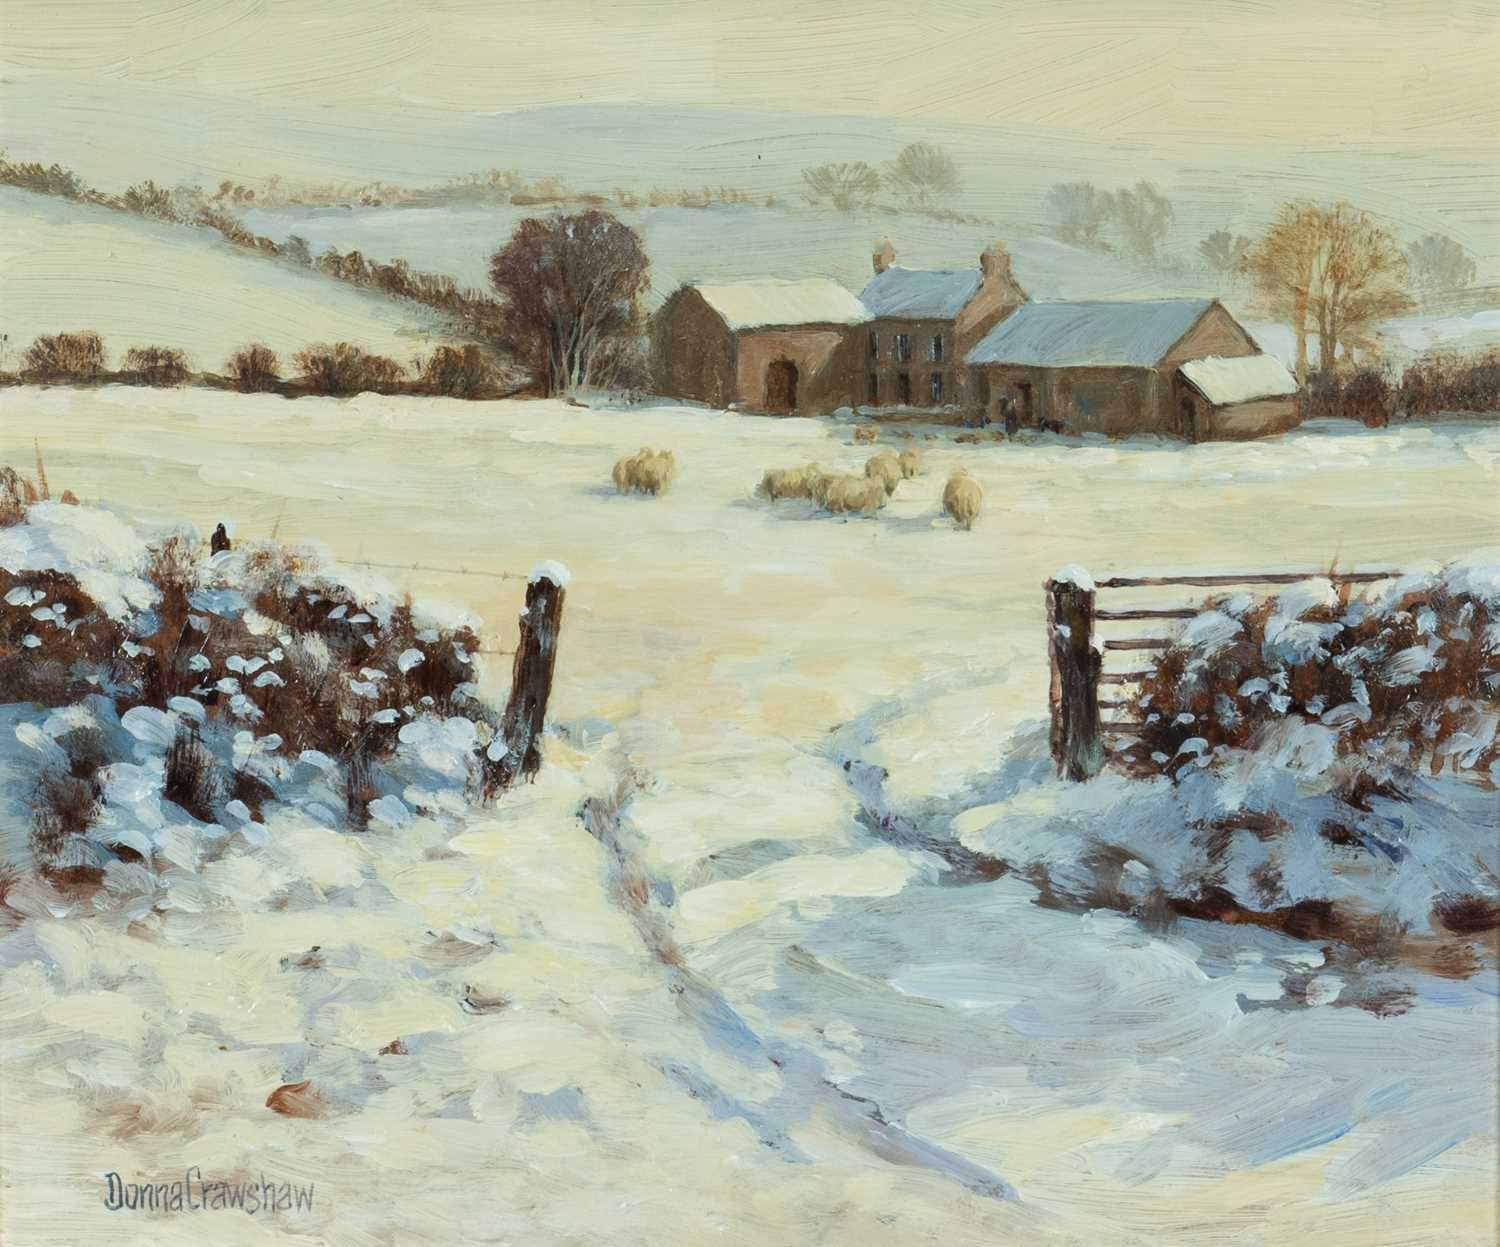 ‡ DONNA CRAWSHAW (b.1960) oil on board - entitled verso, 'Snow, Snow, Snow' on The Gallery at Trap